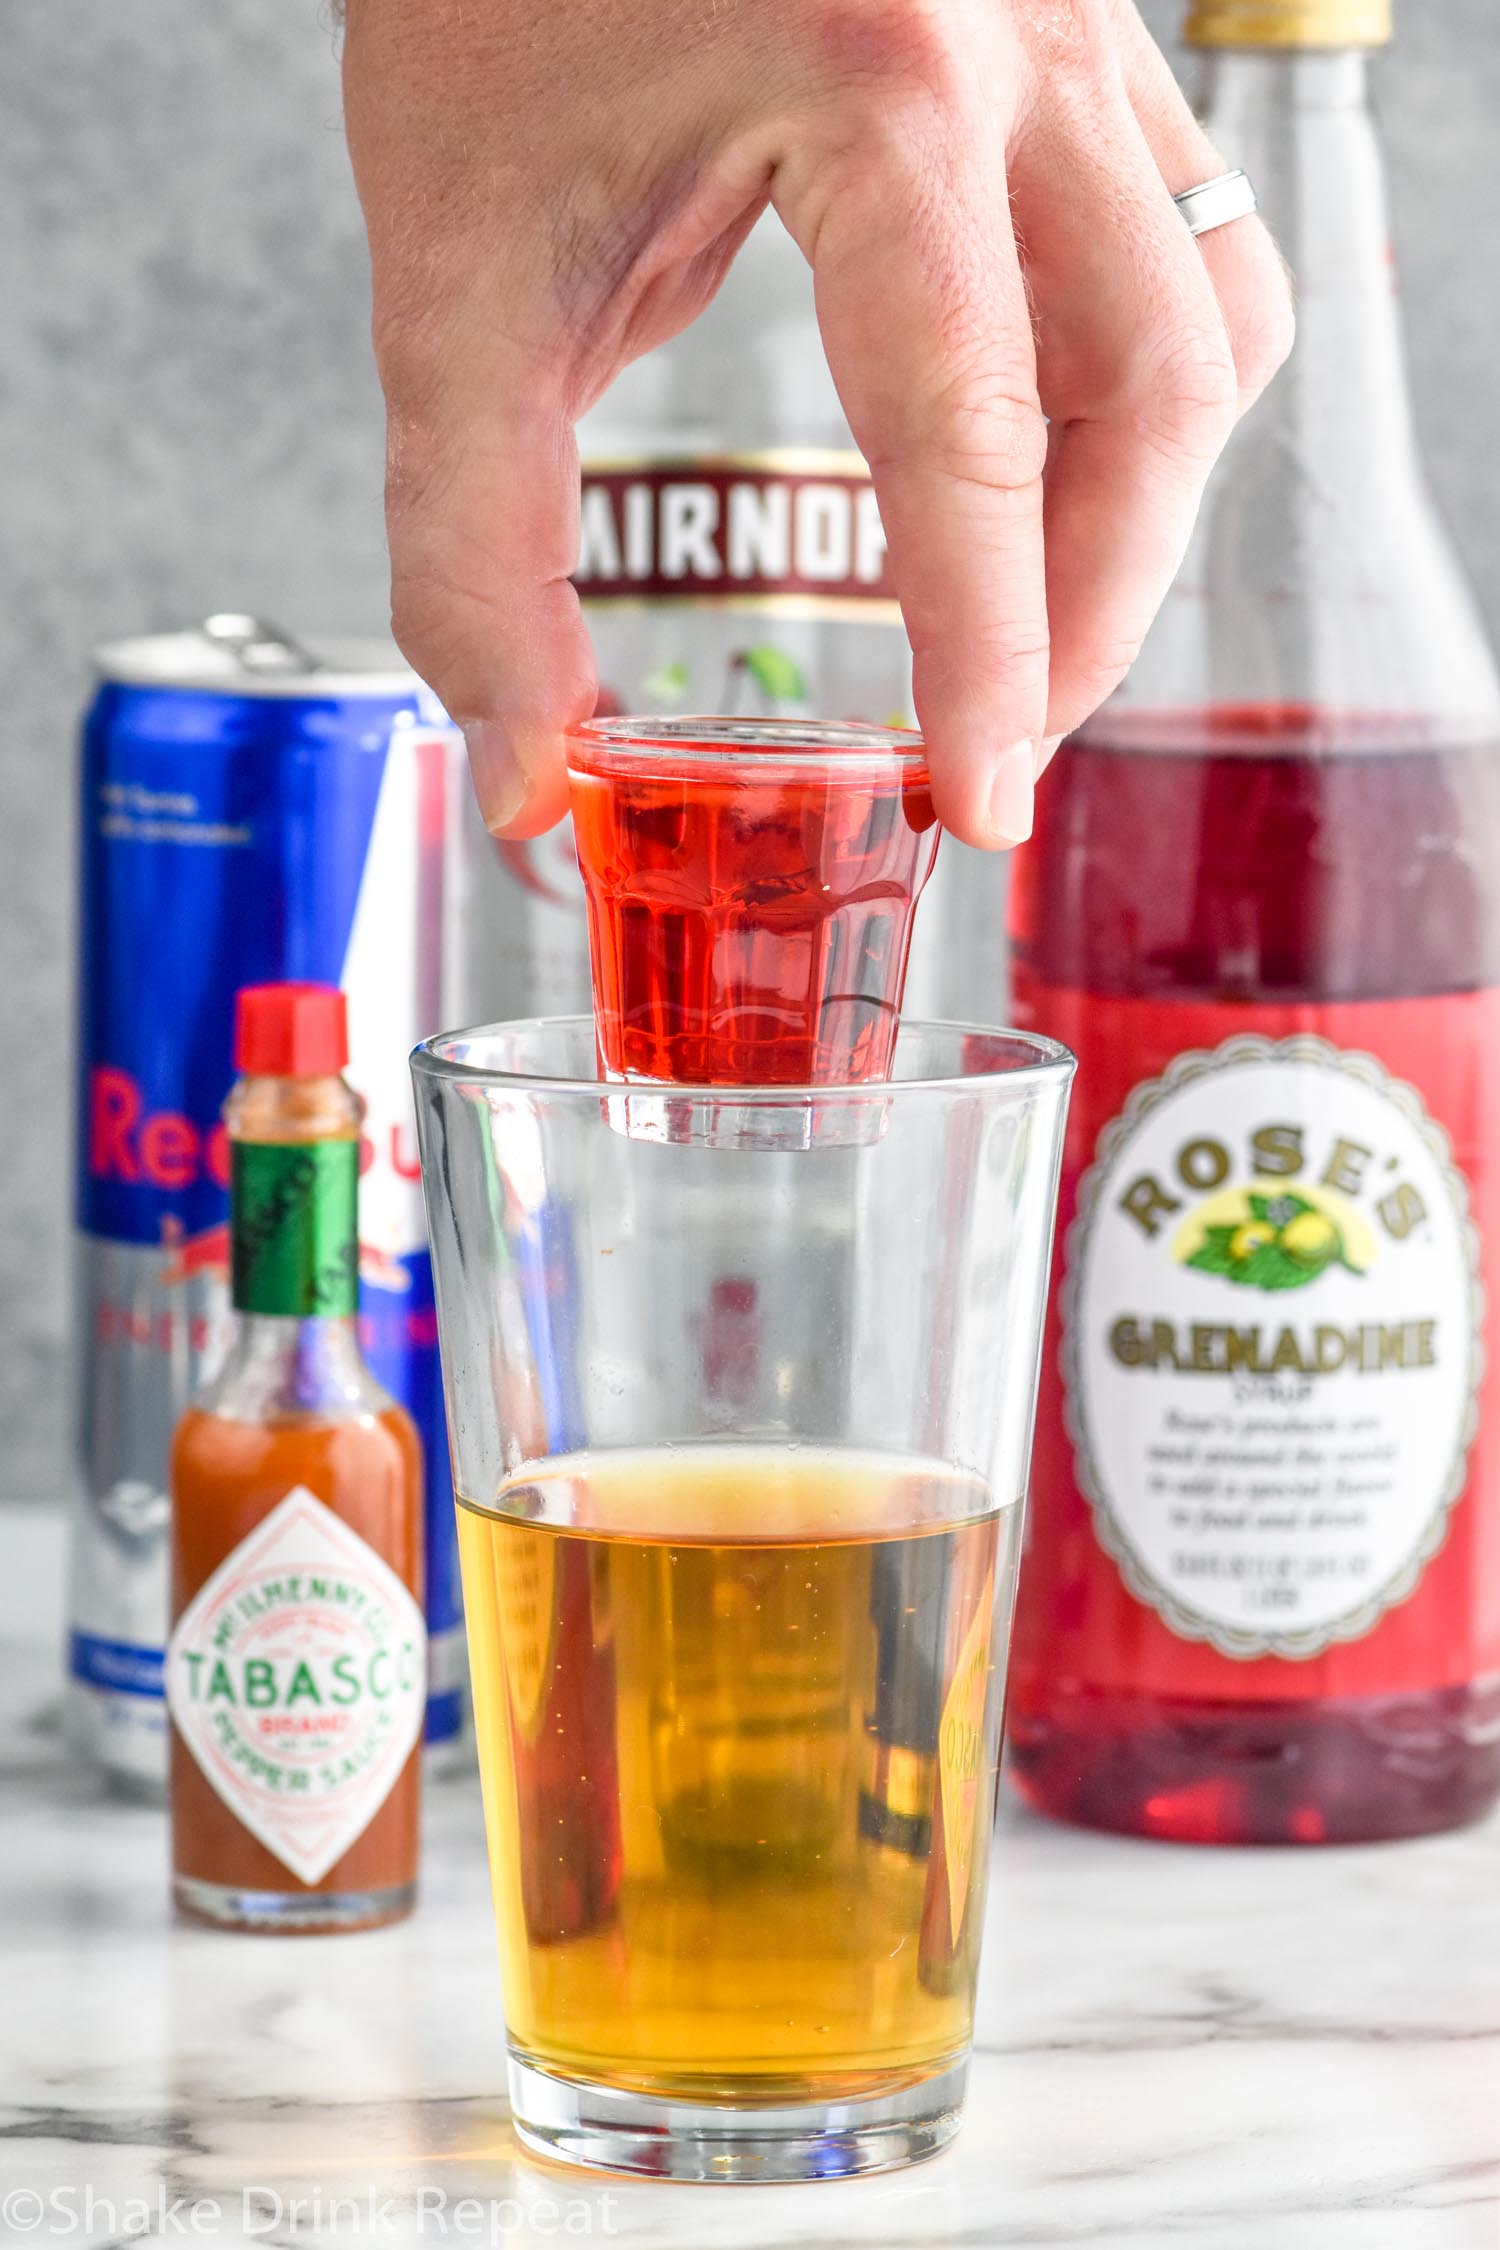 Photo of person's hand holding a shot glass of ingredients over a pint glass of energy drink for Chuck Norris Shot recipe. Hot sauce, red bull, cherry vodka, and grenadine in the background.